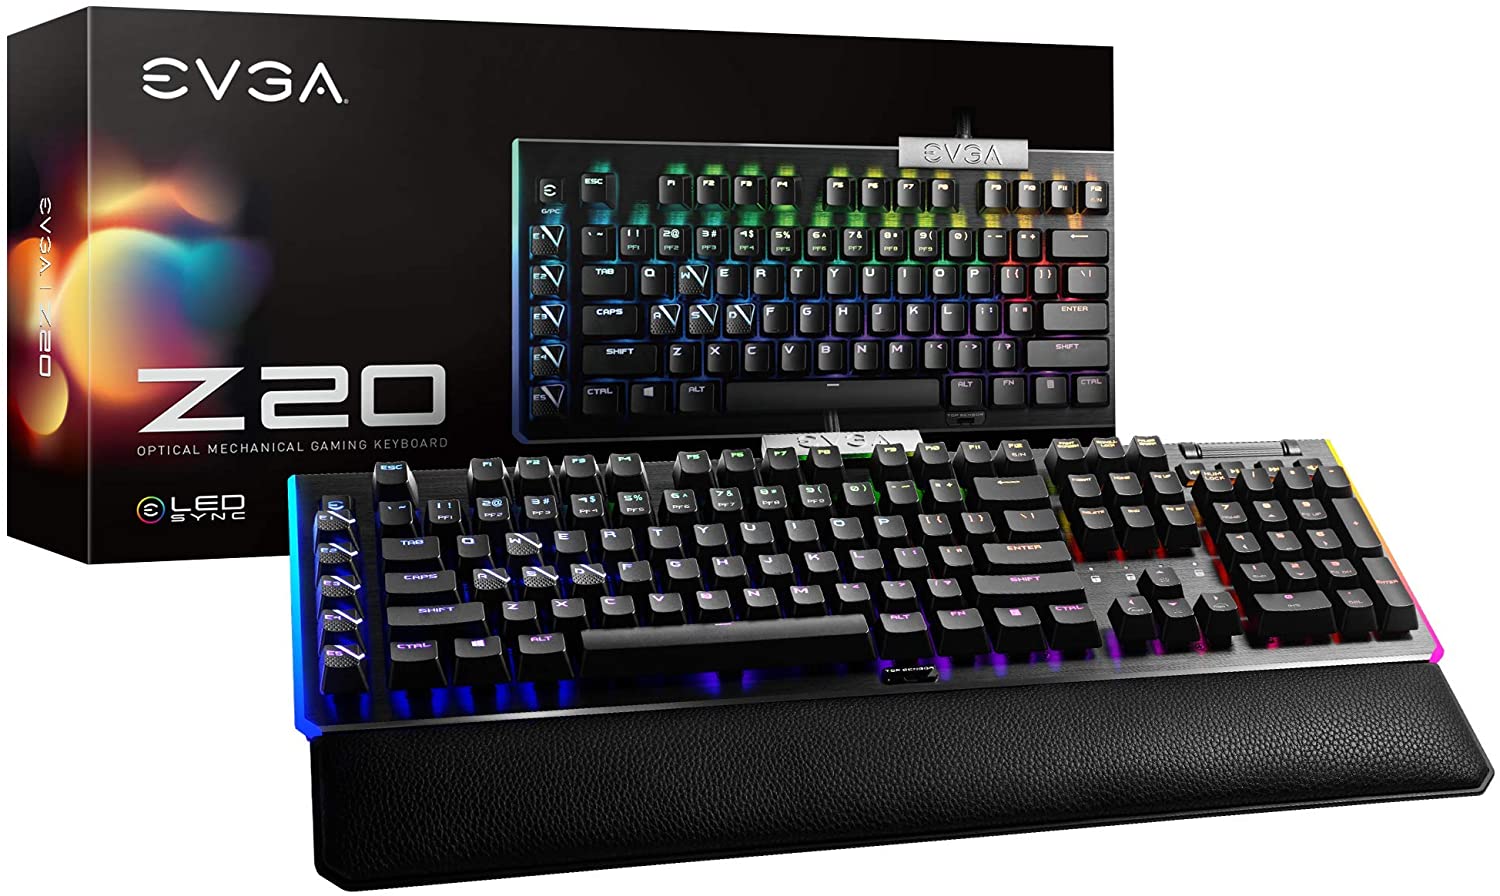 EVGA RGB LED Mechanical Keyboards: Z20 RGB Optical: Linear $64.99, Clicky $59.99 or Z15 RGB: Linear w/ Silver Switches $44.99 or Clicky w/ Bronze Switches $39.99 via Amazon